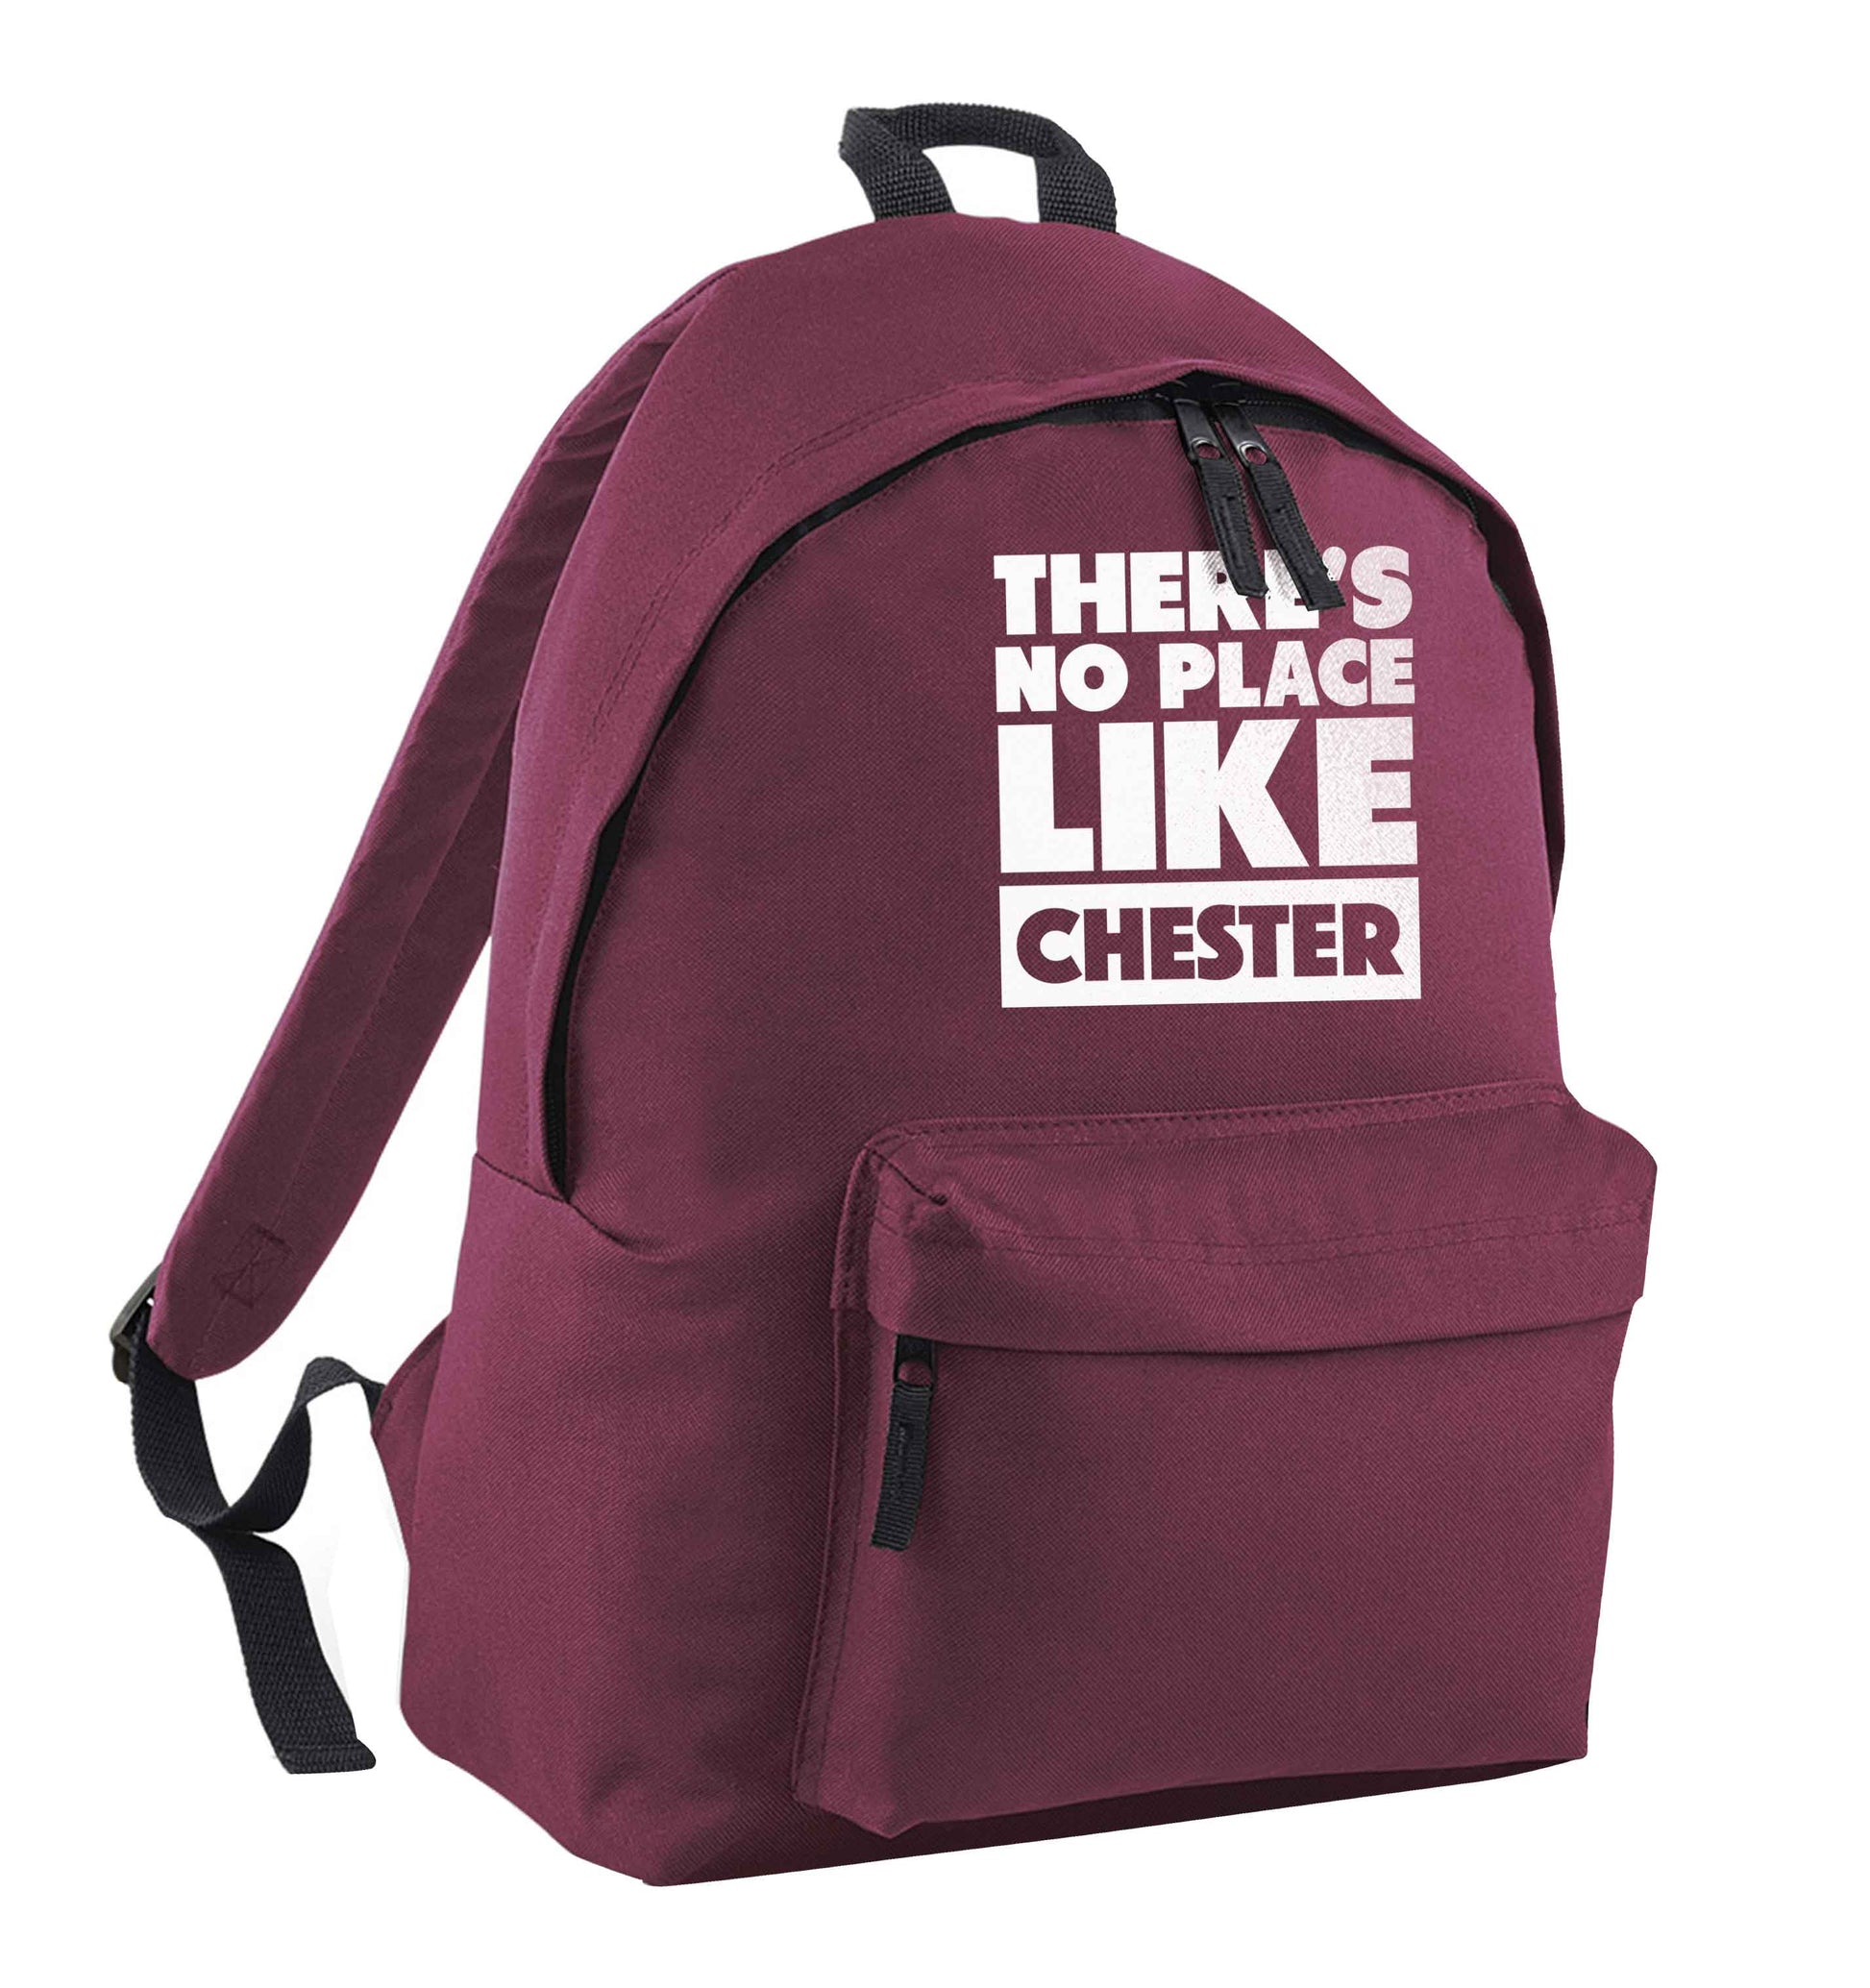 There's no place like Chester maroon adults backpack